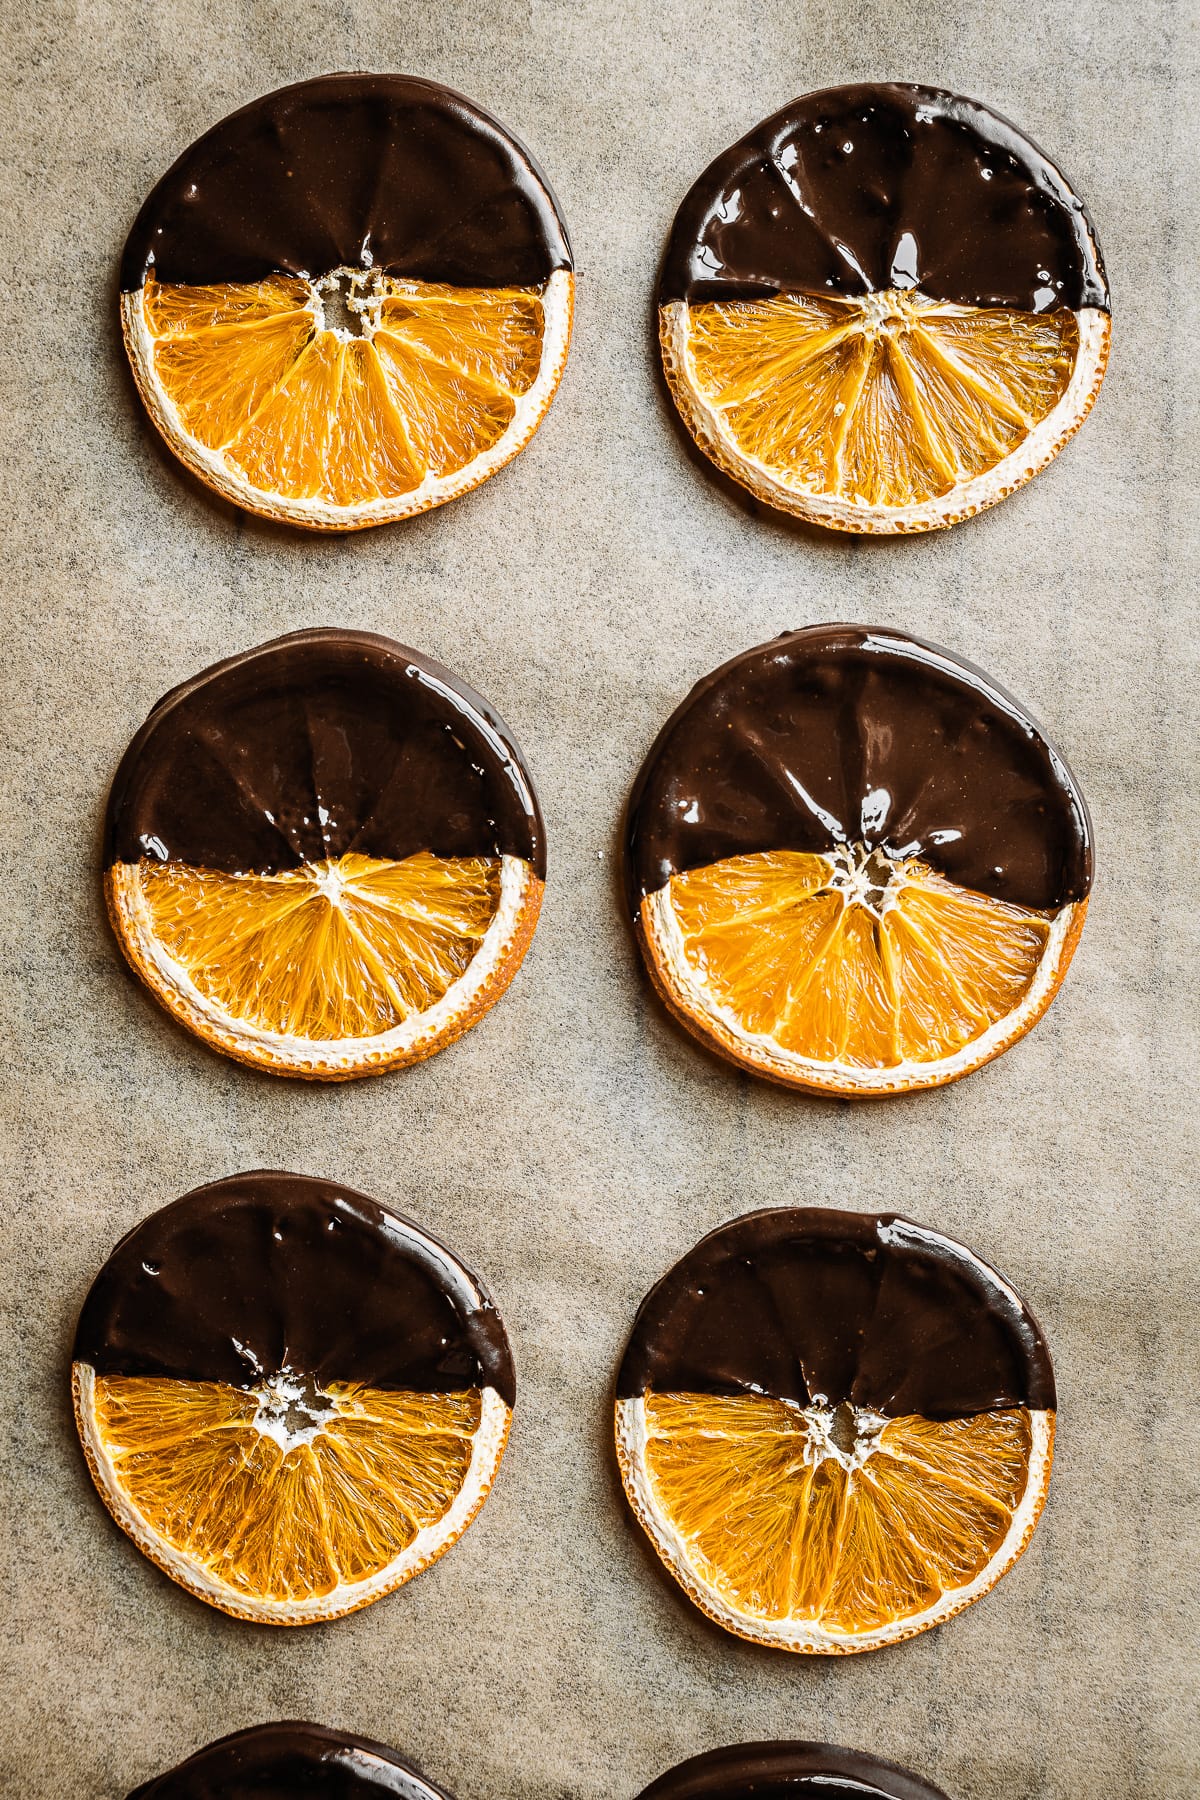 Dried orange slices dipped in dark chocolate on brown parchment paper.